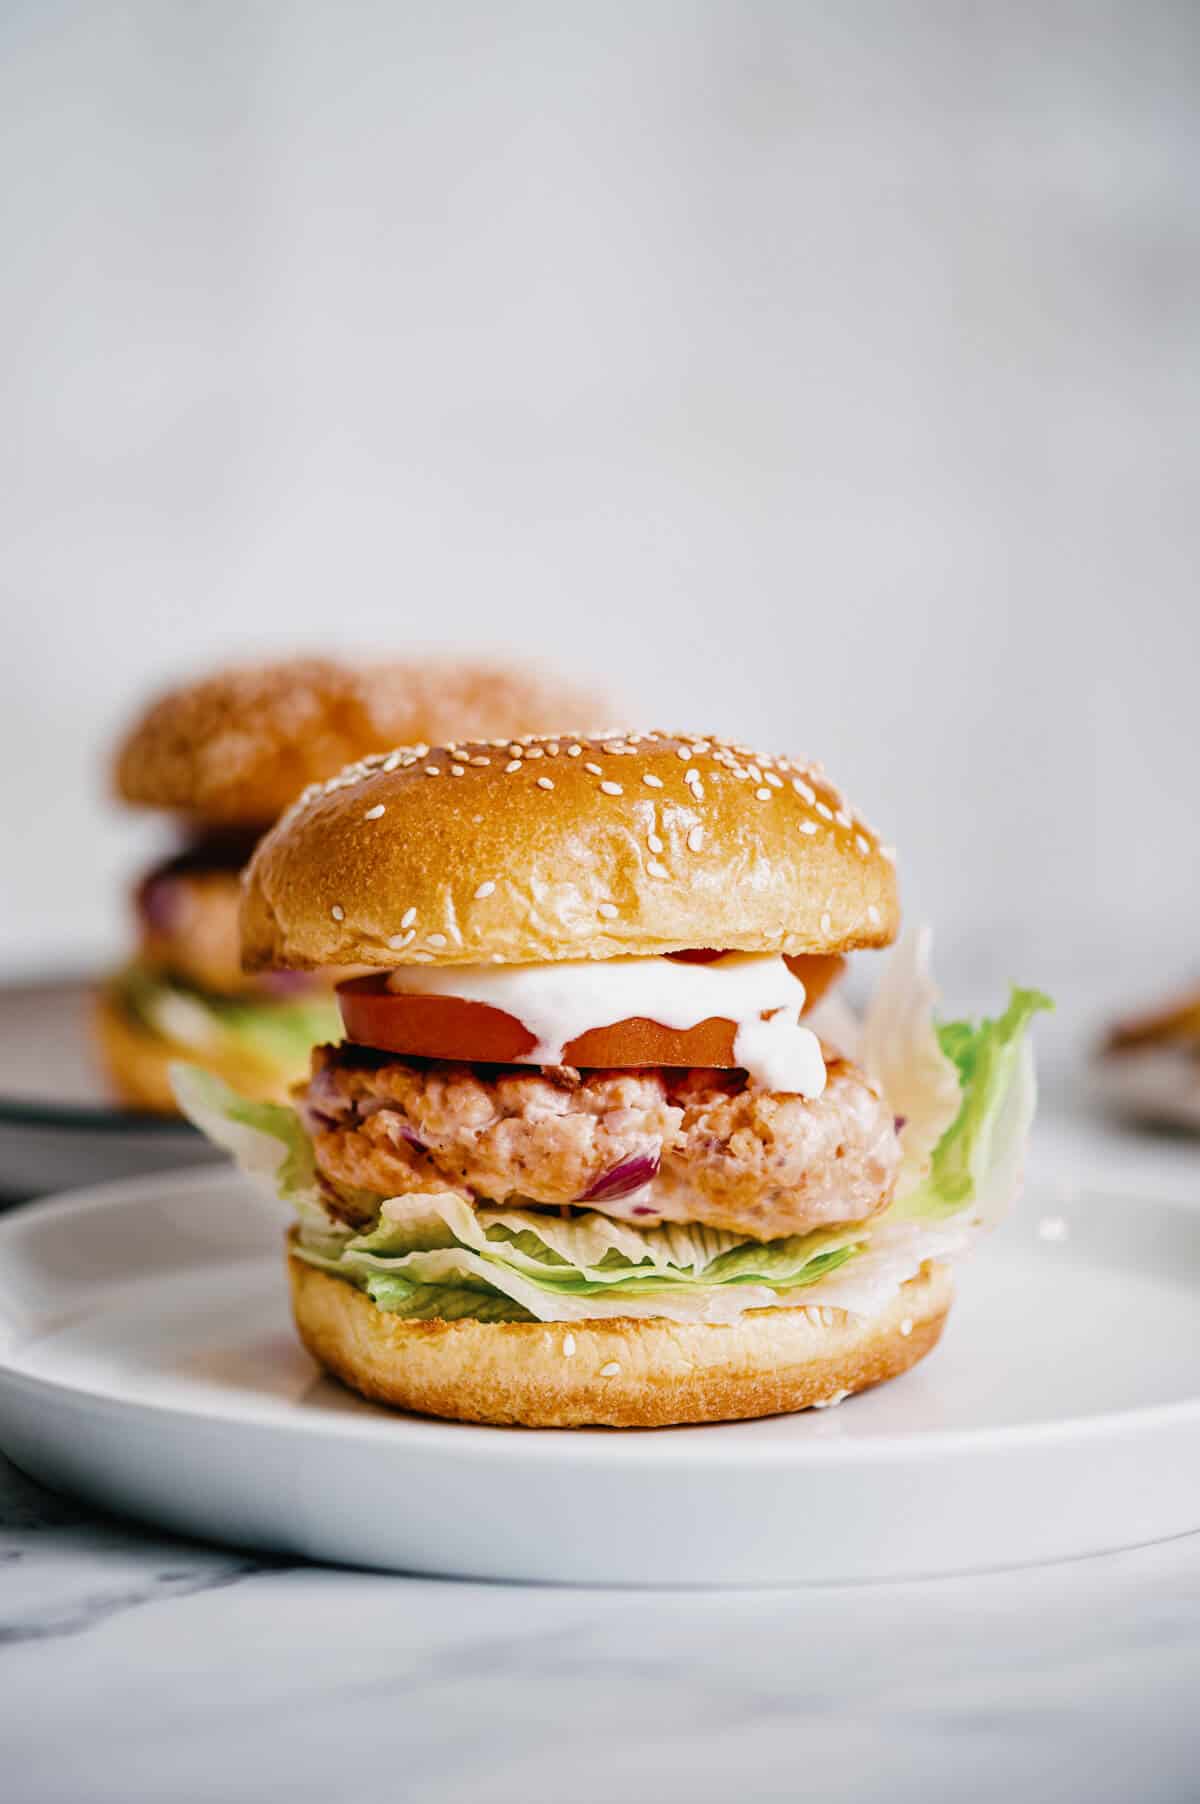 a grilled salmon burger on a white plate.